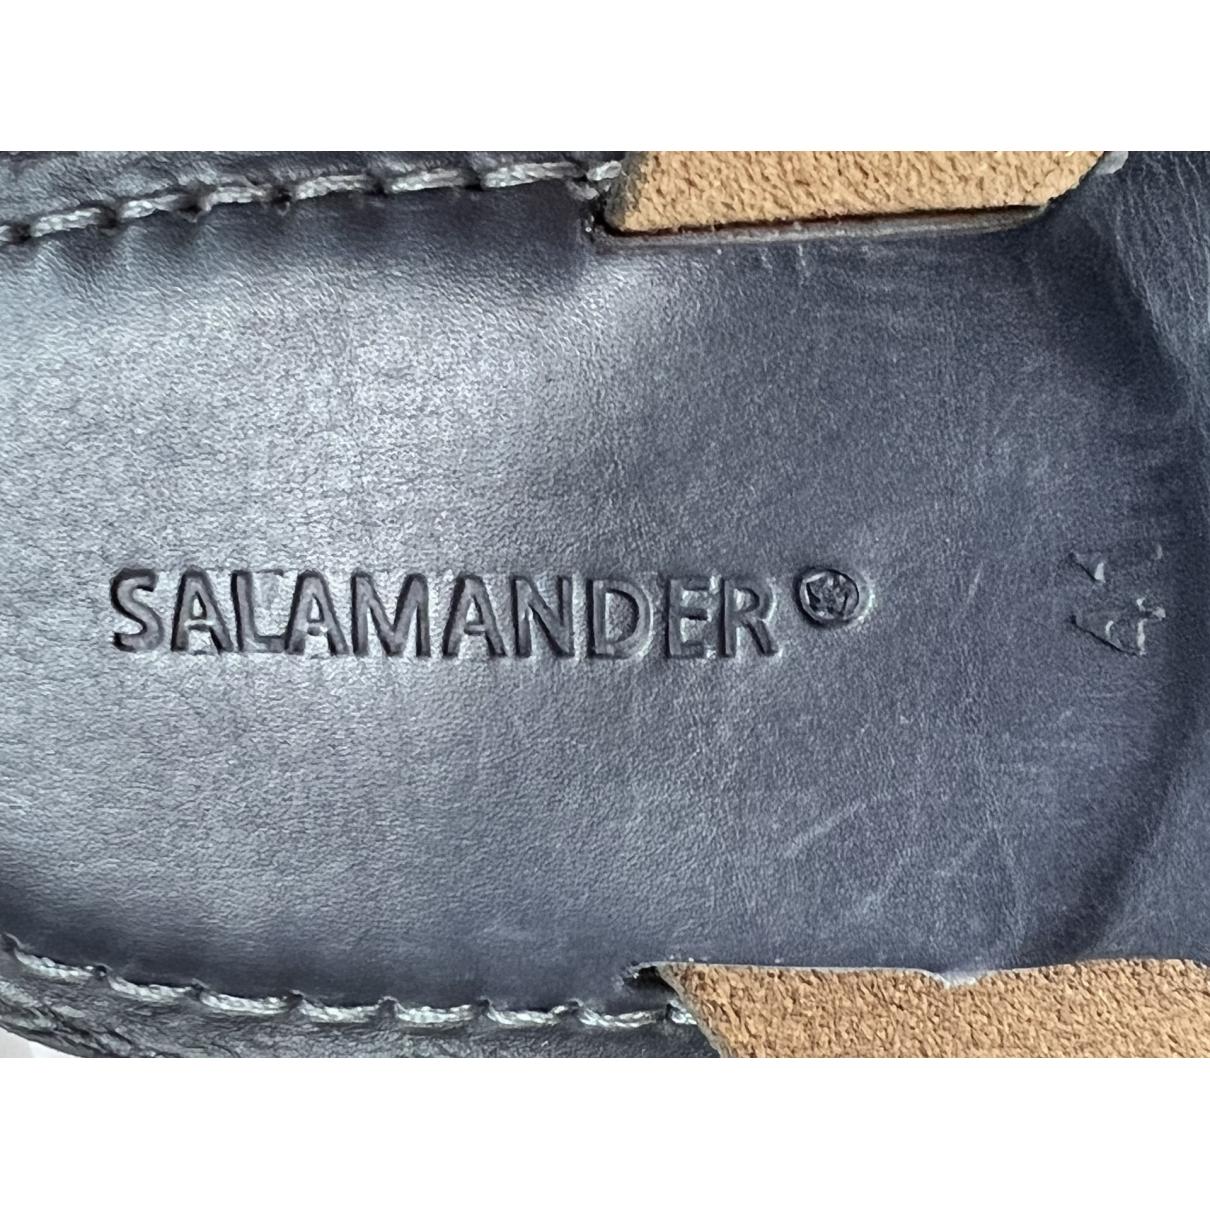 41 Navy Leather Leather 22557086 SALAMANDER - in EU sandals size